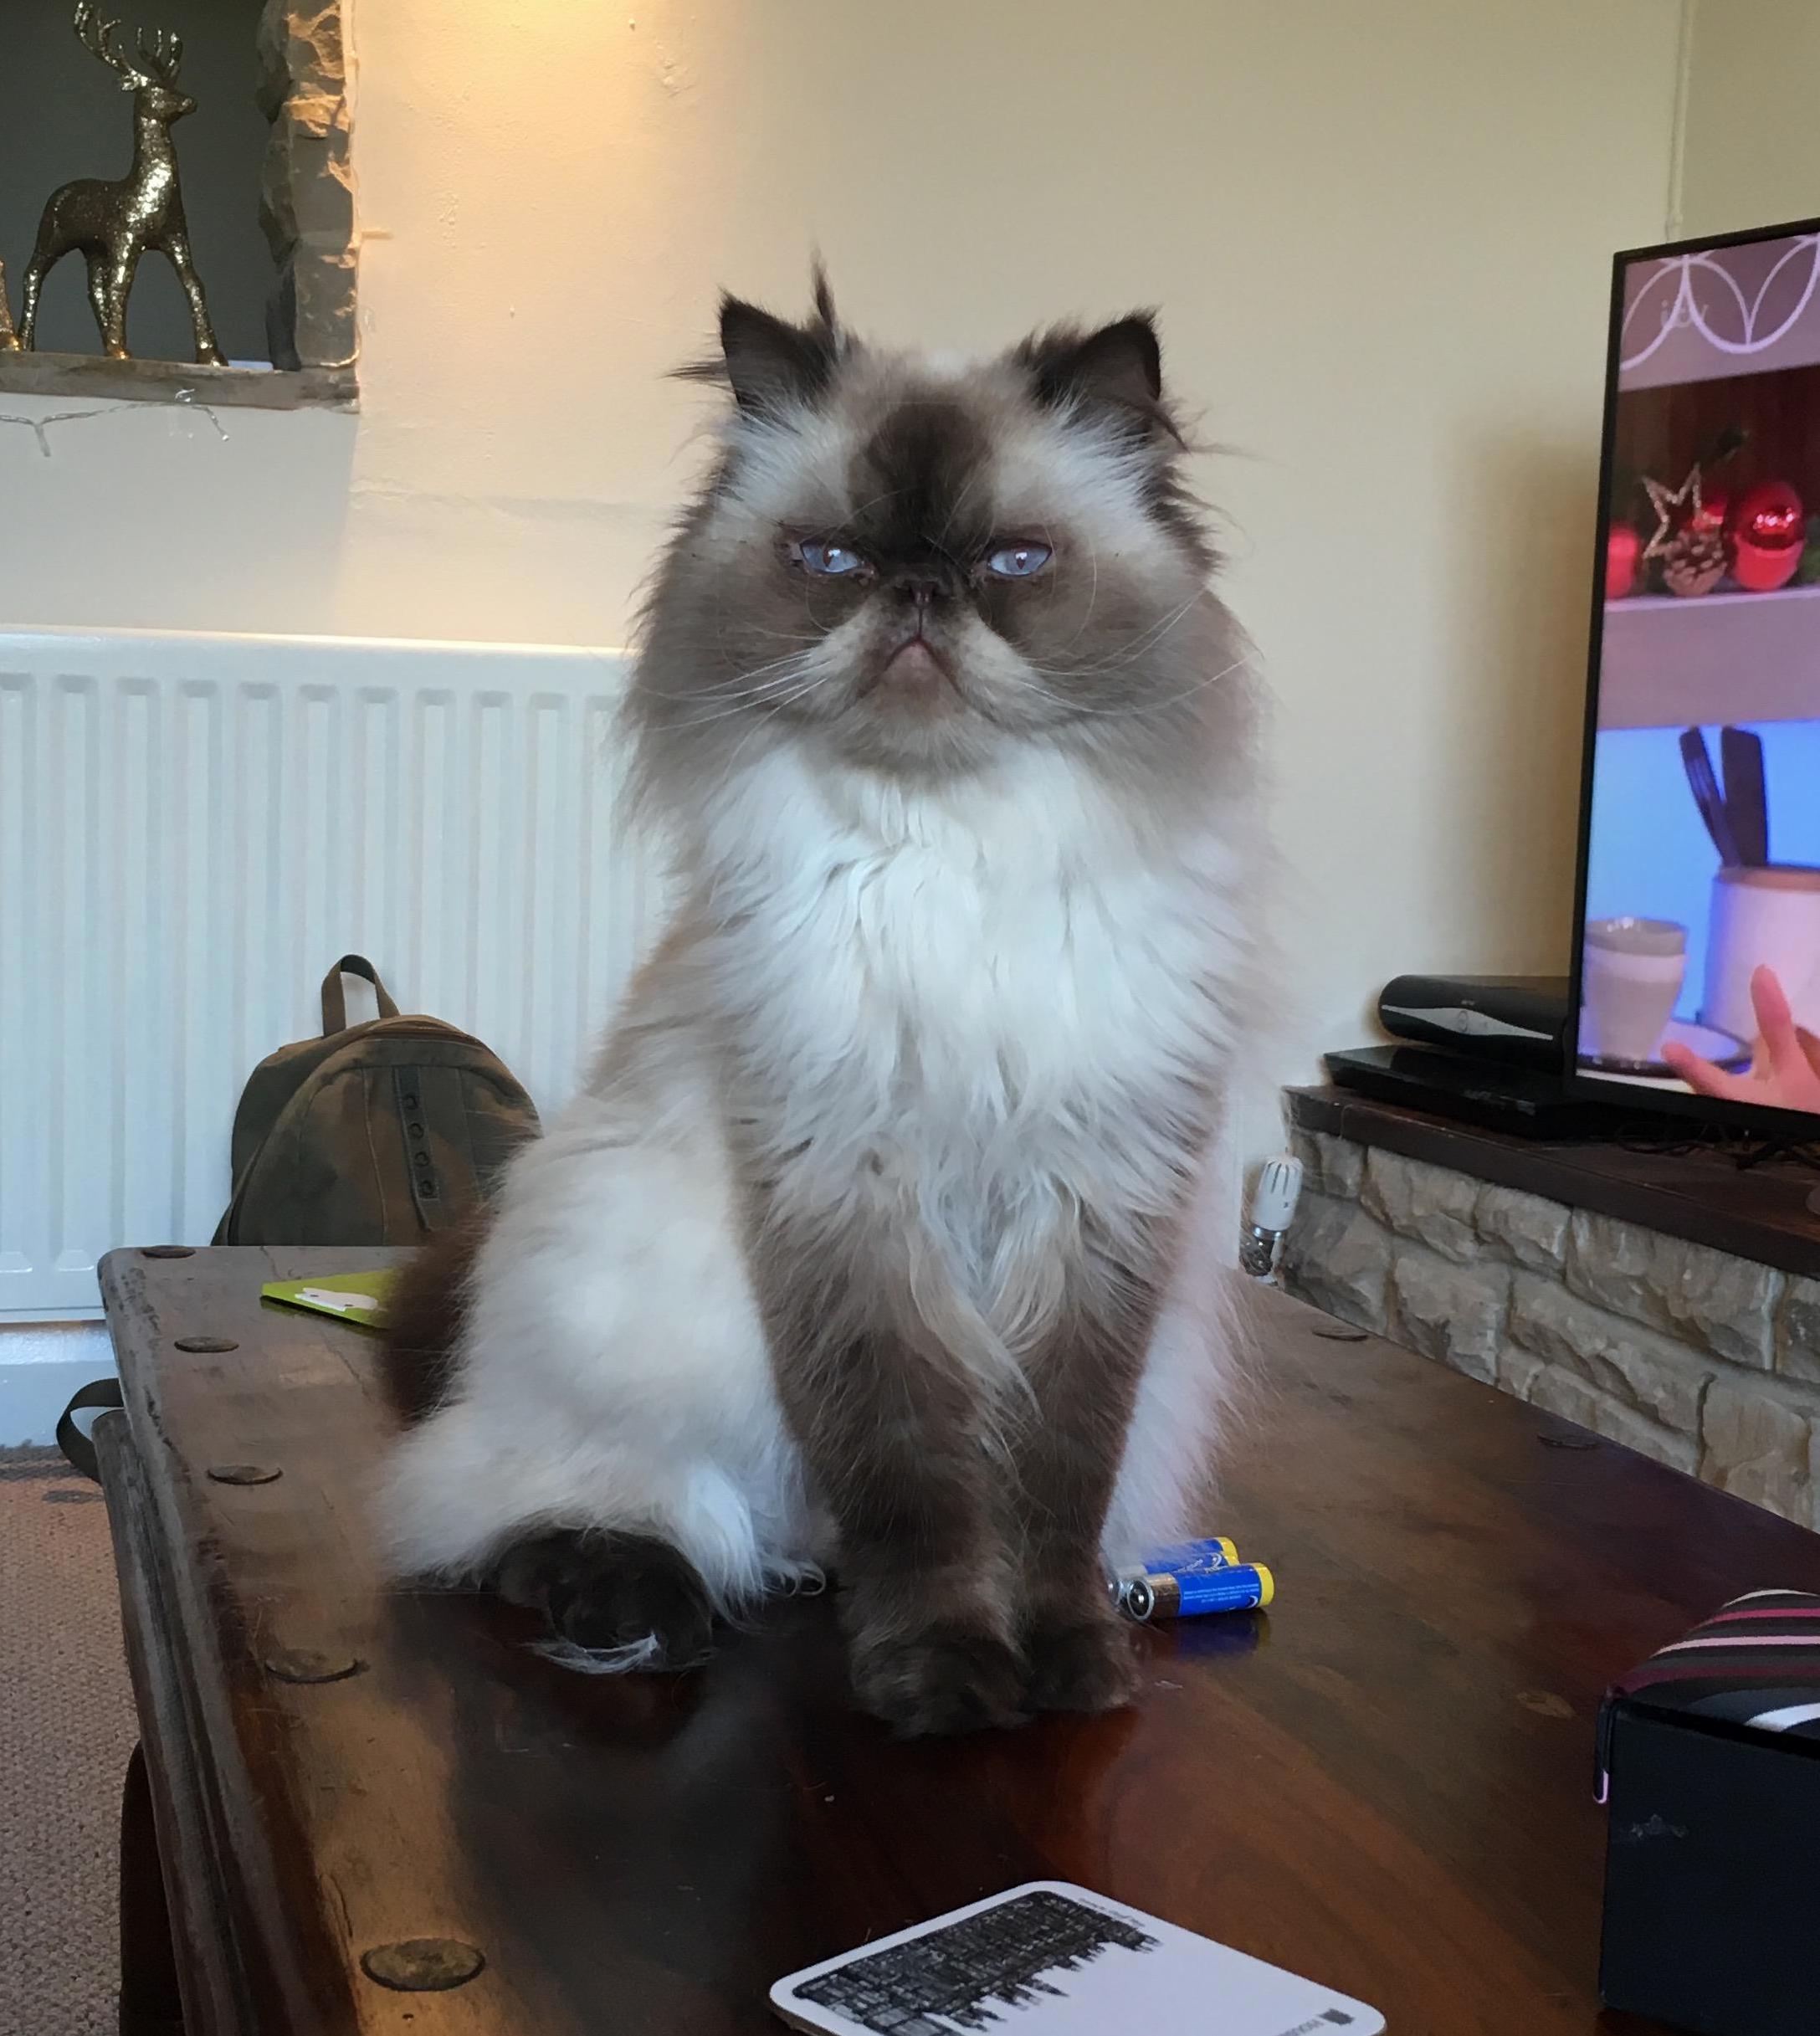 Visited an old friend yesterday met his rather grumpy floof xpost rfloof